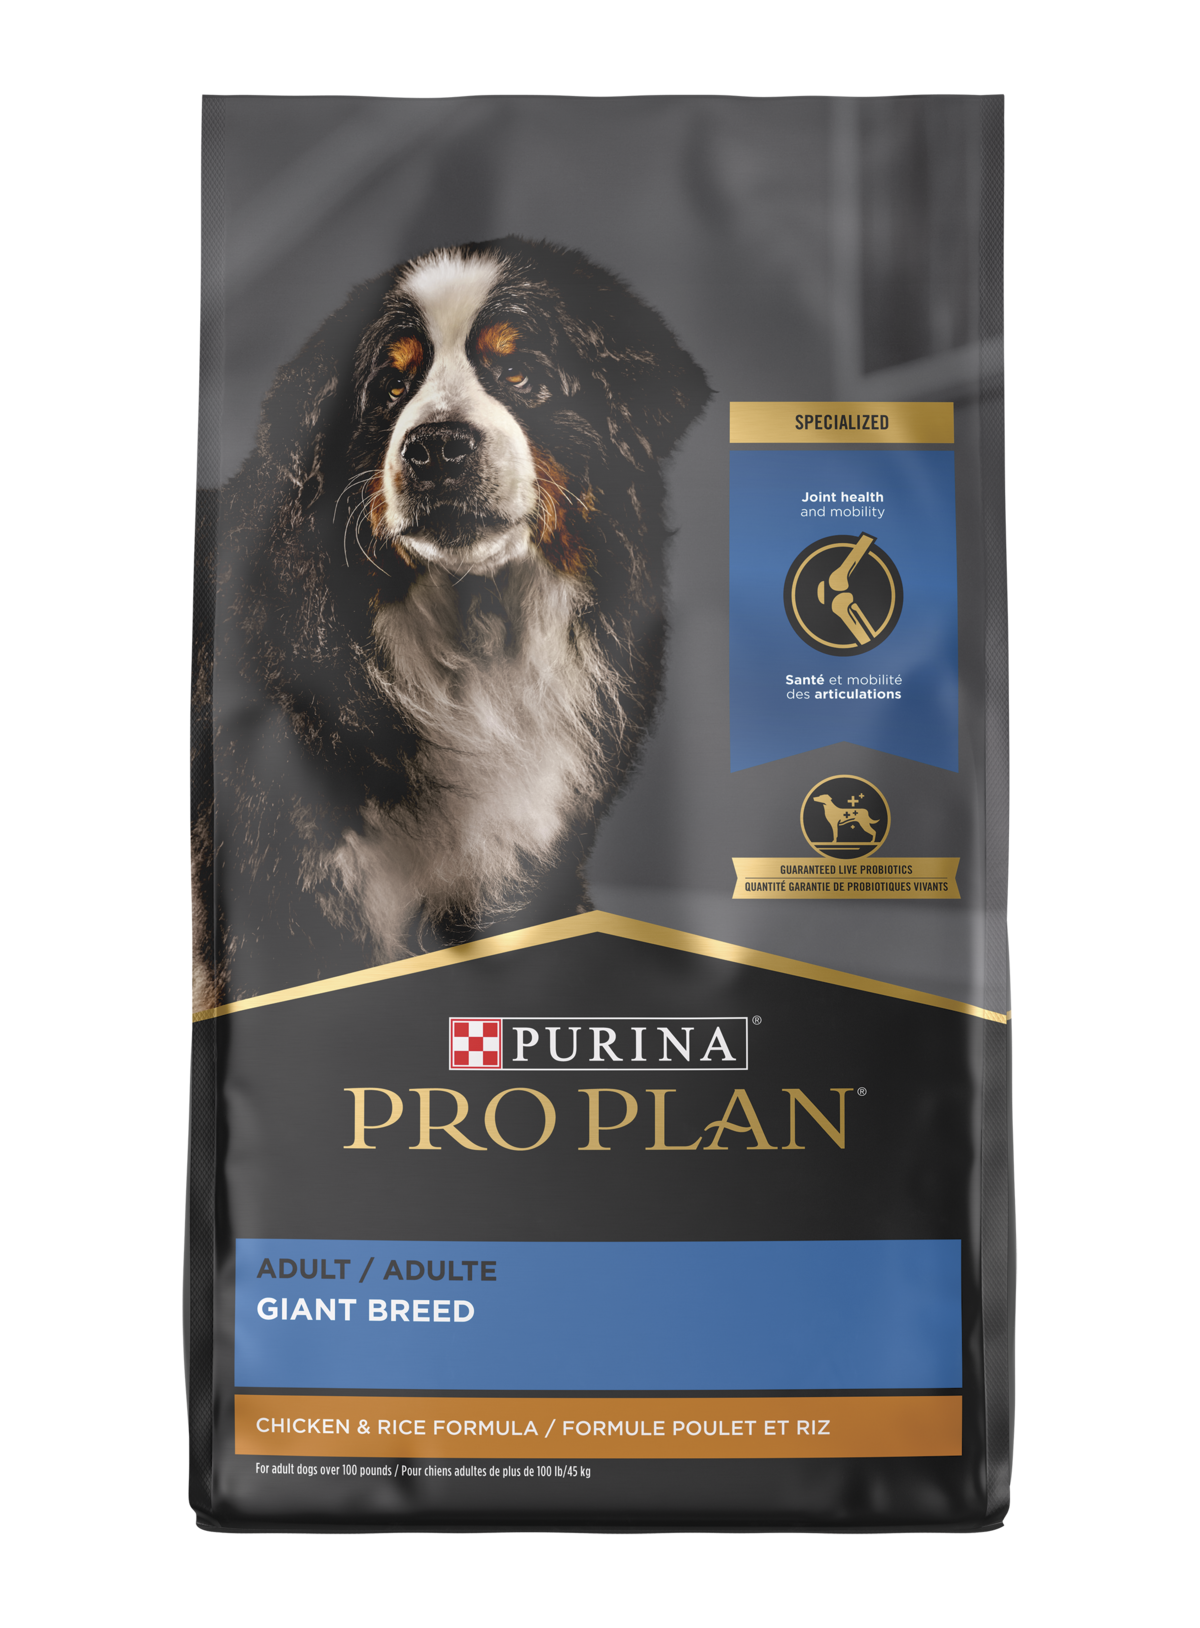 Purina Pro Plan Adult Giant Breed Chicken & Rice Formula, 34 lbs